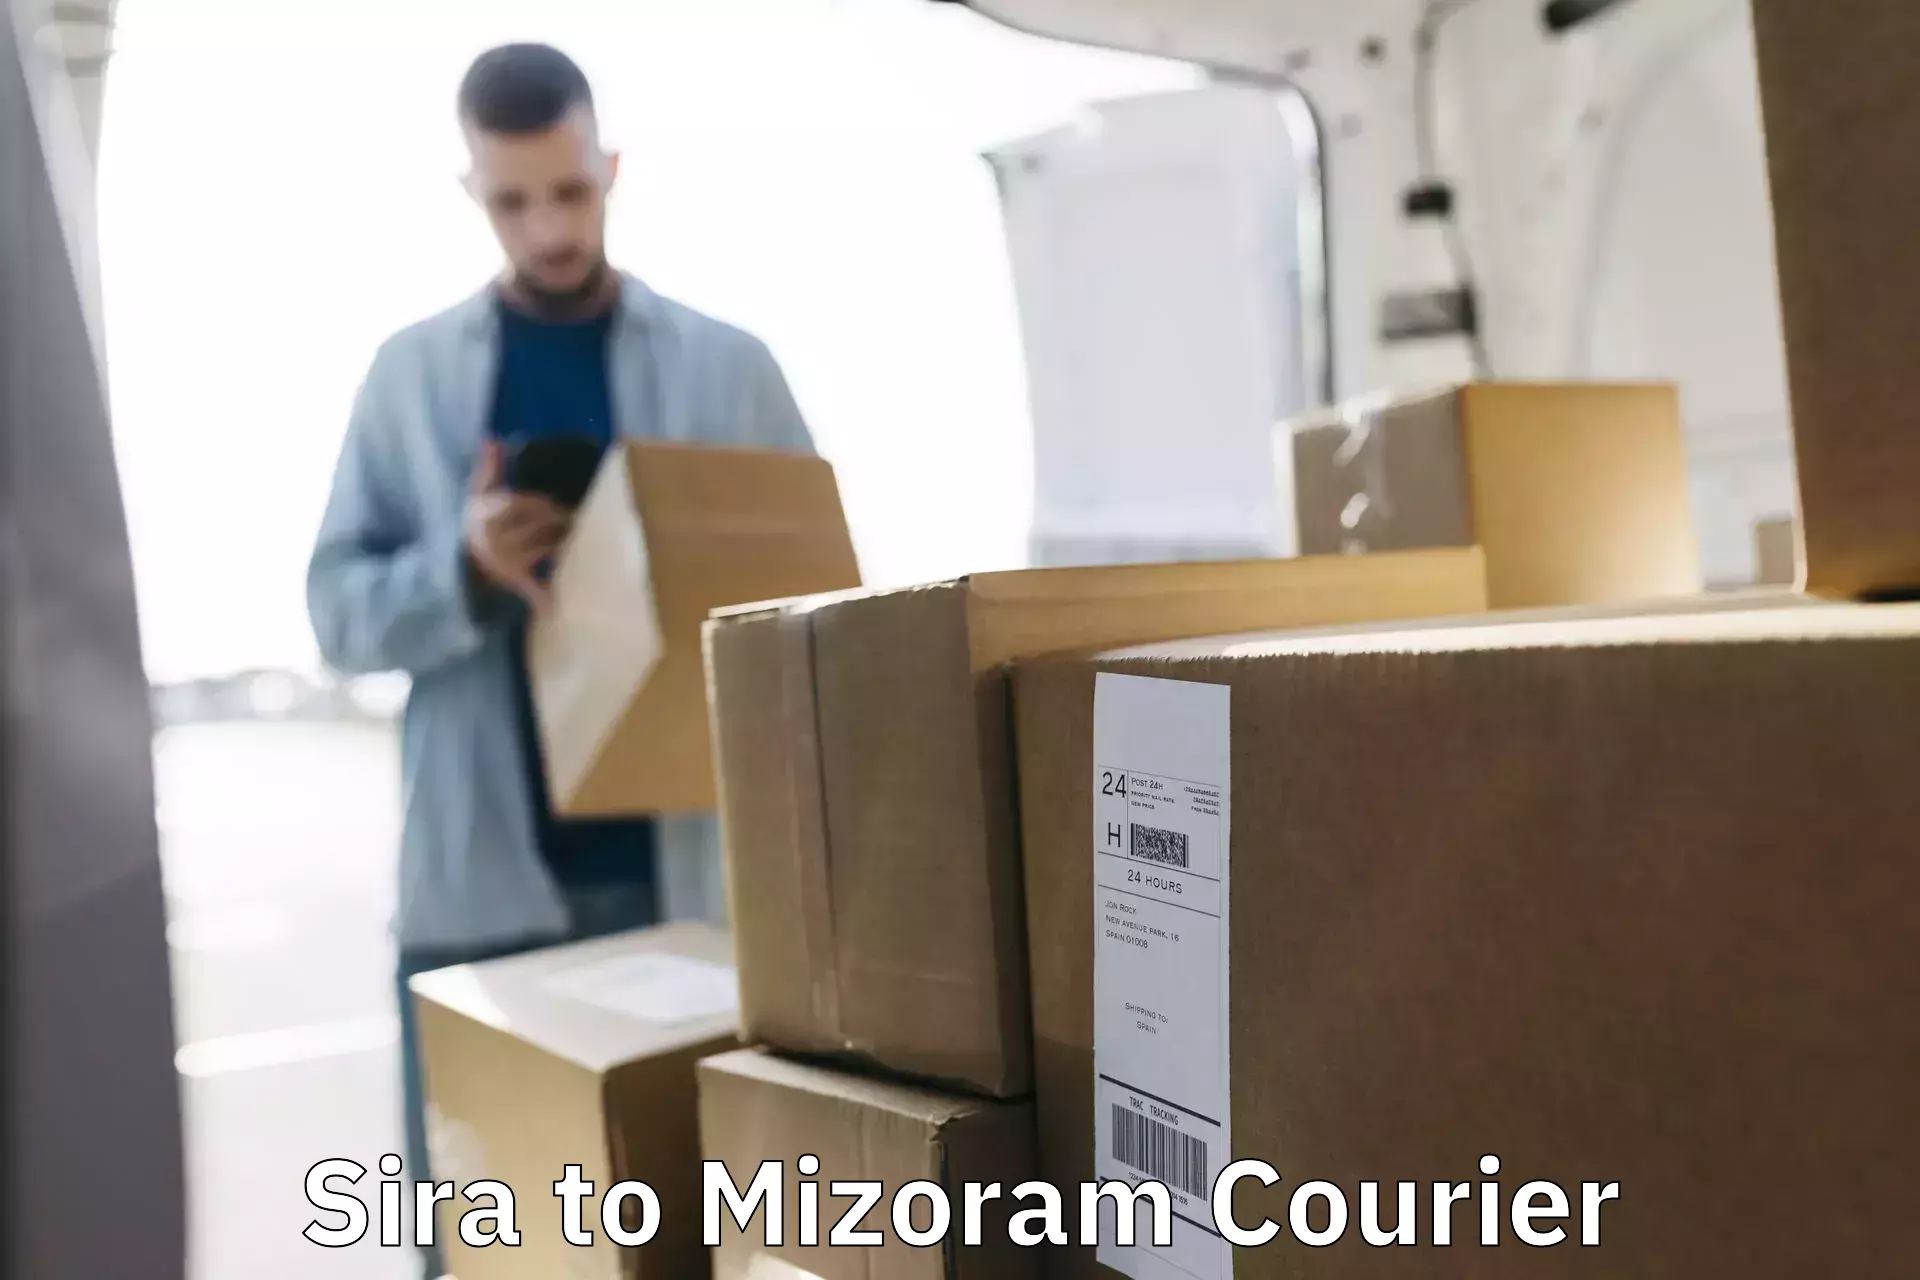 Full-service courier options Sira to Mizoram